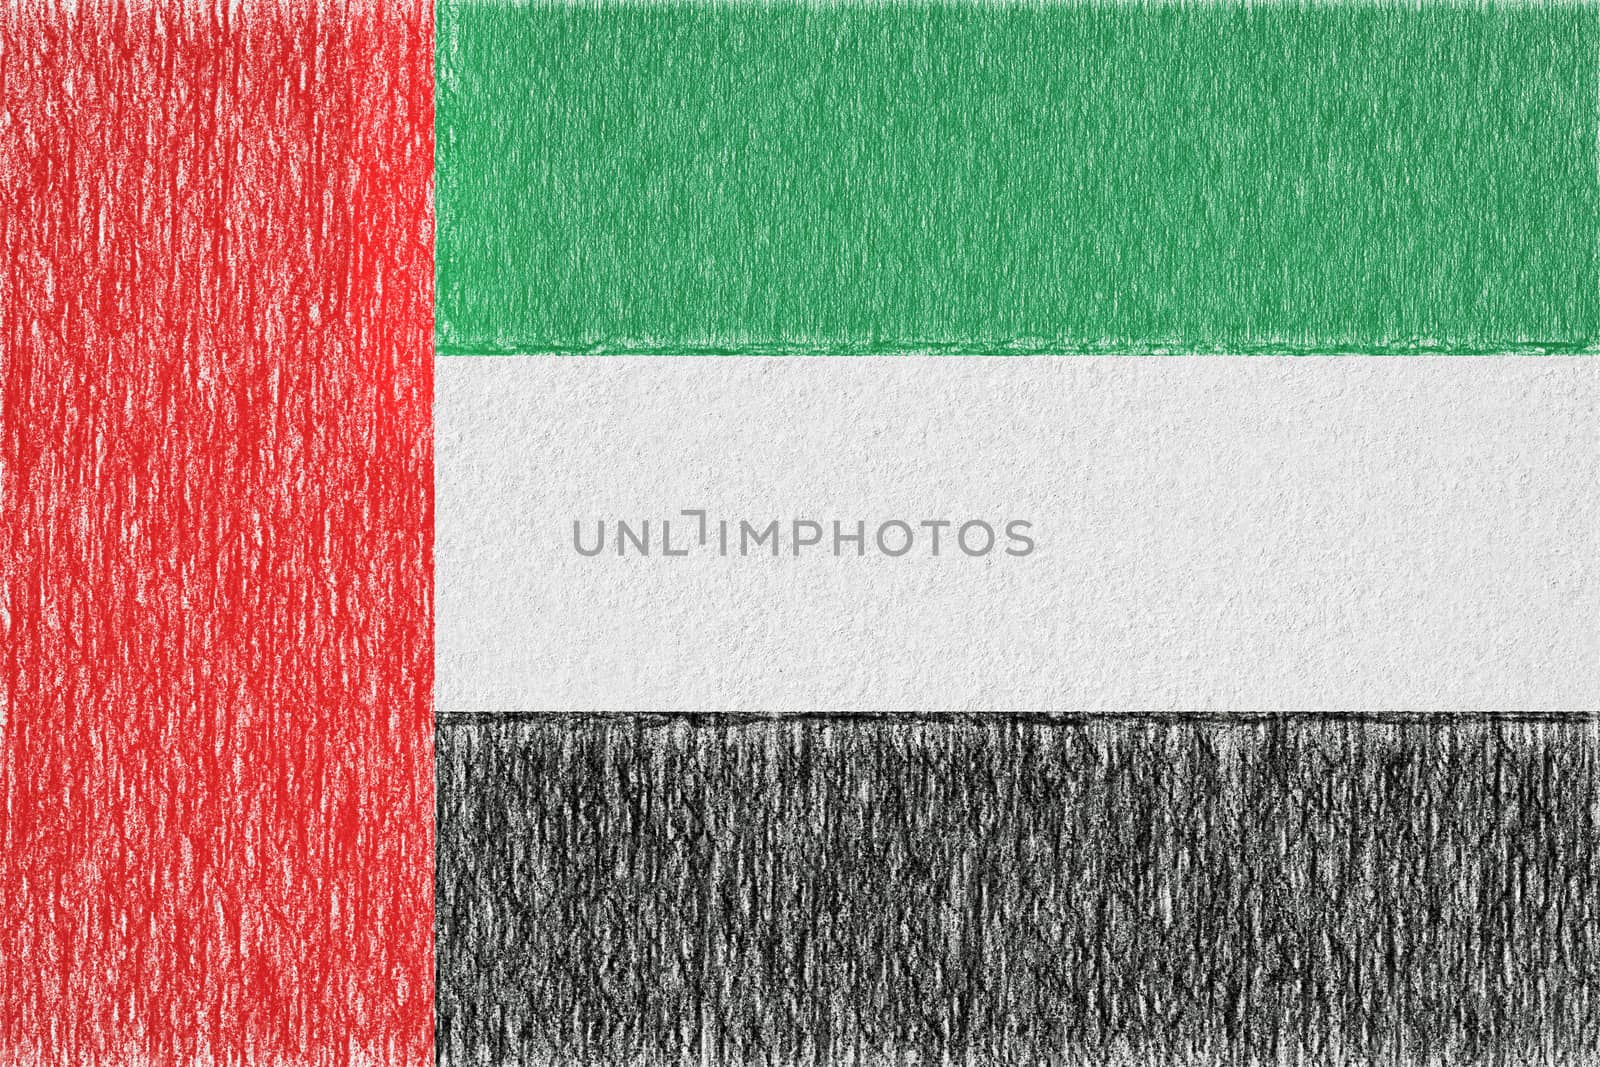 United arab painted flag. Patriotic drawing on paper background. National flag of United arab